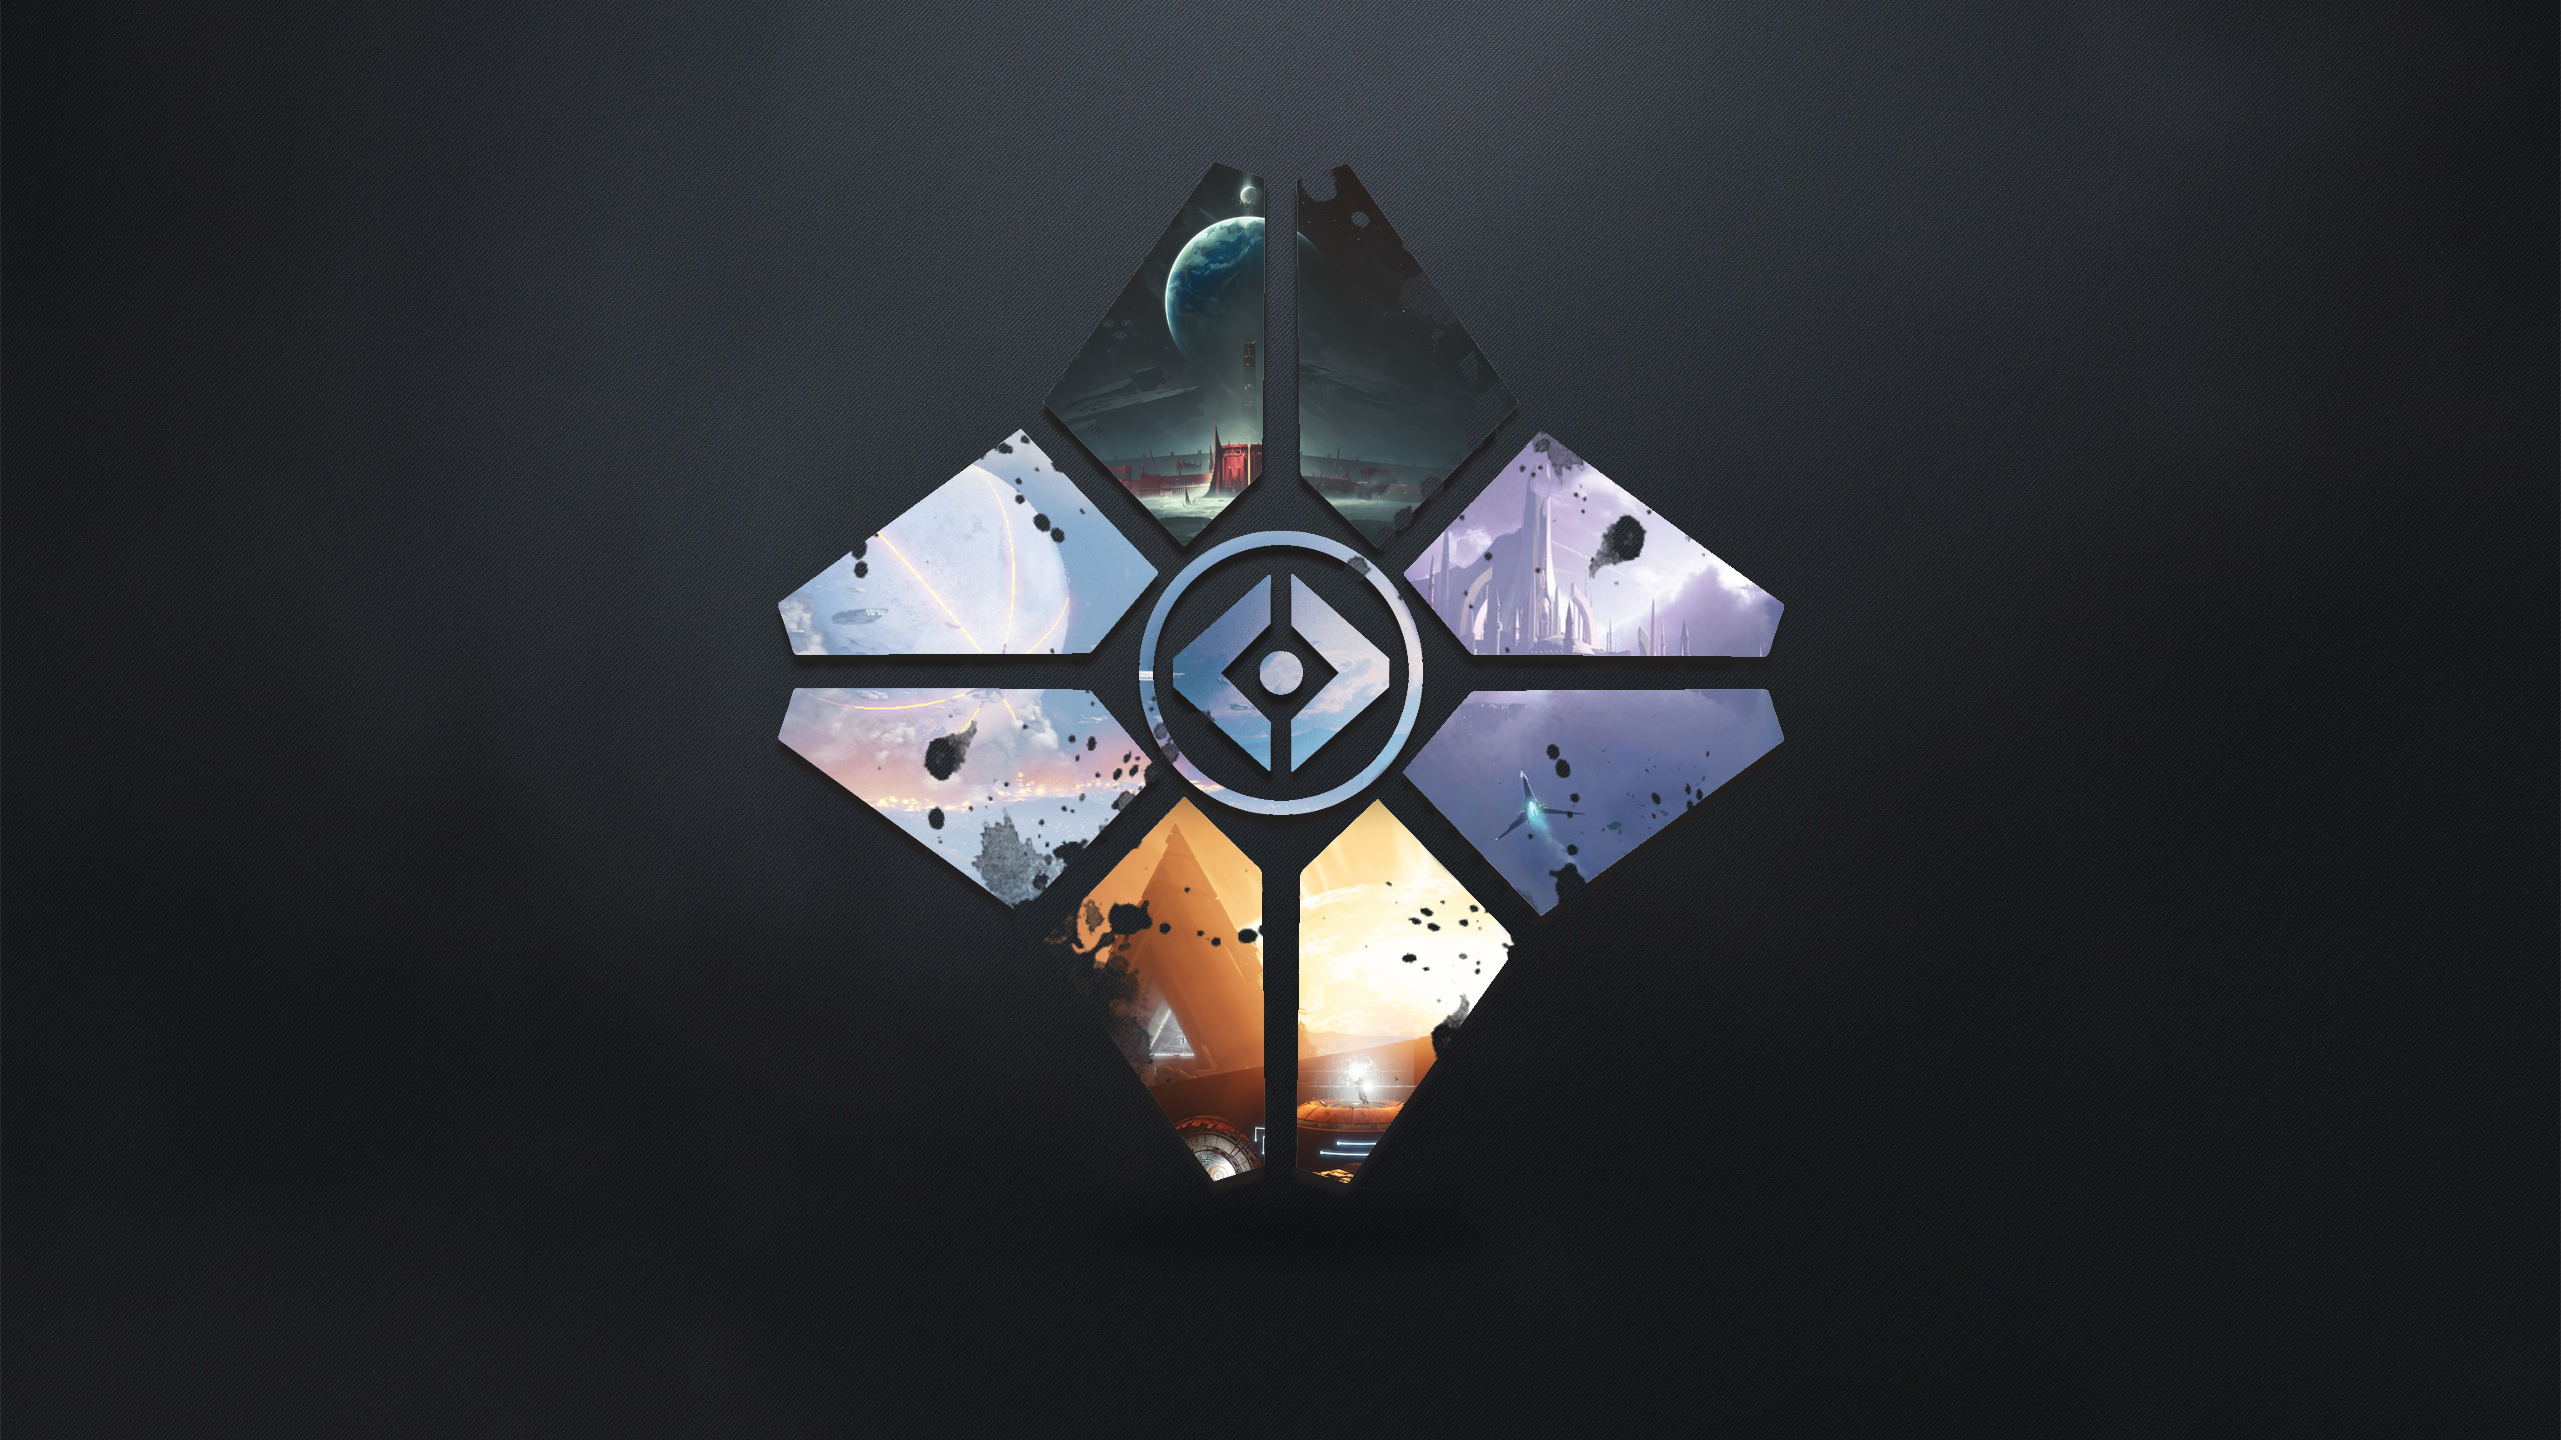 destiny-2-ghost-2-0-interface-created-by-guardian